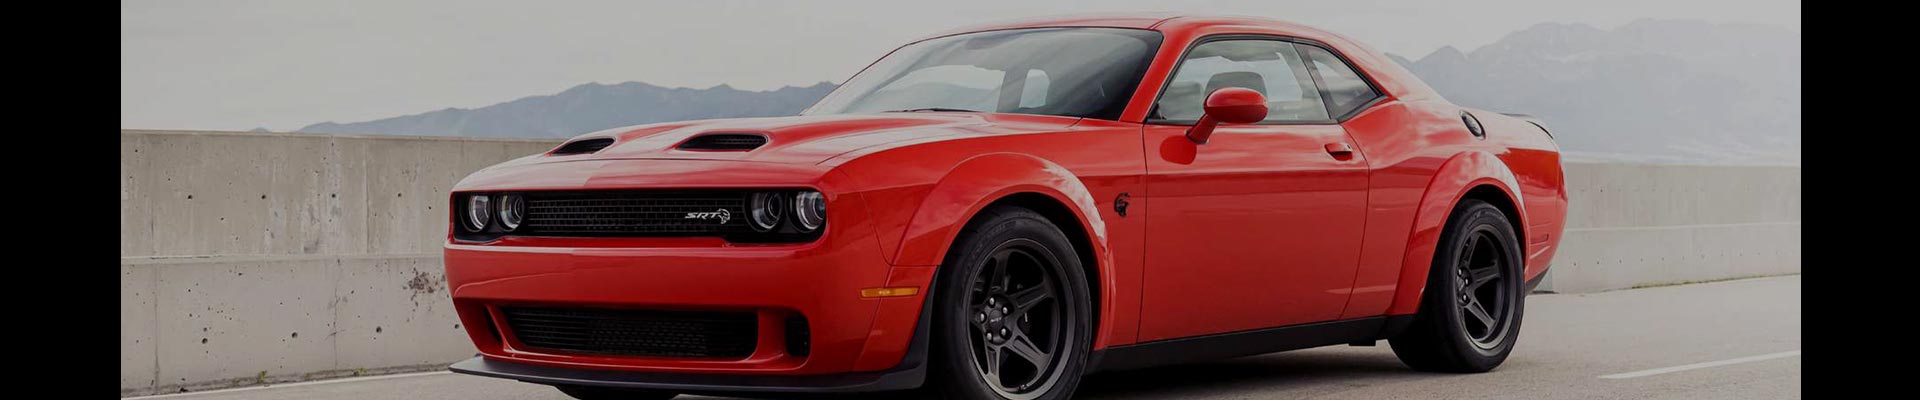 Shop Replacement and OEM 2009 Dodge Challenger Parts with Discounted Price on the Net